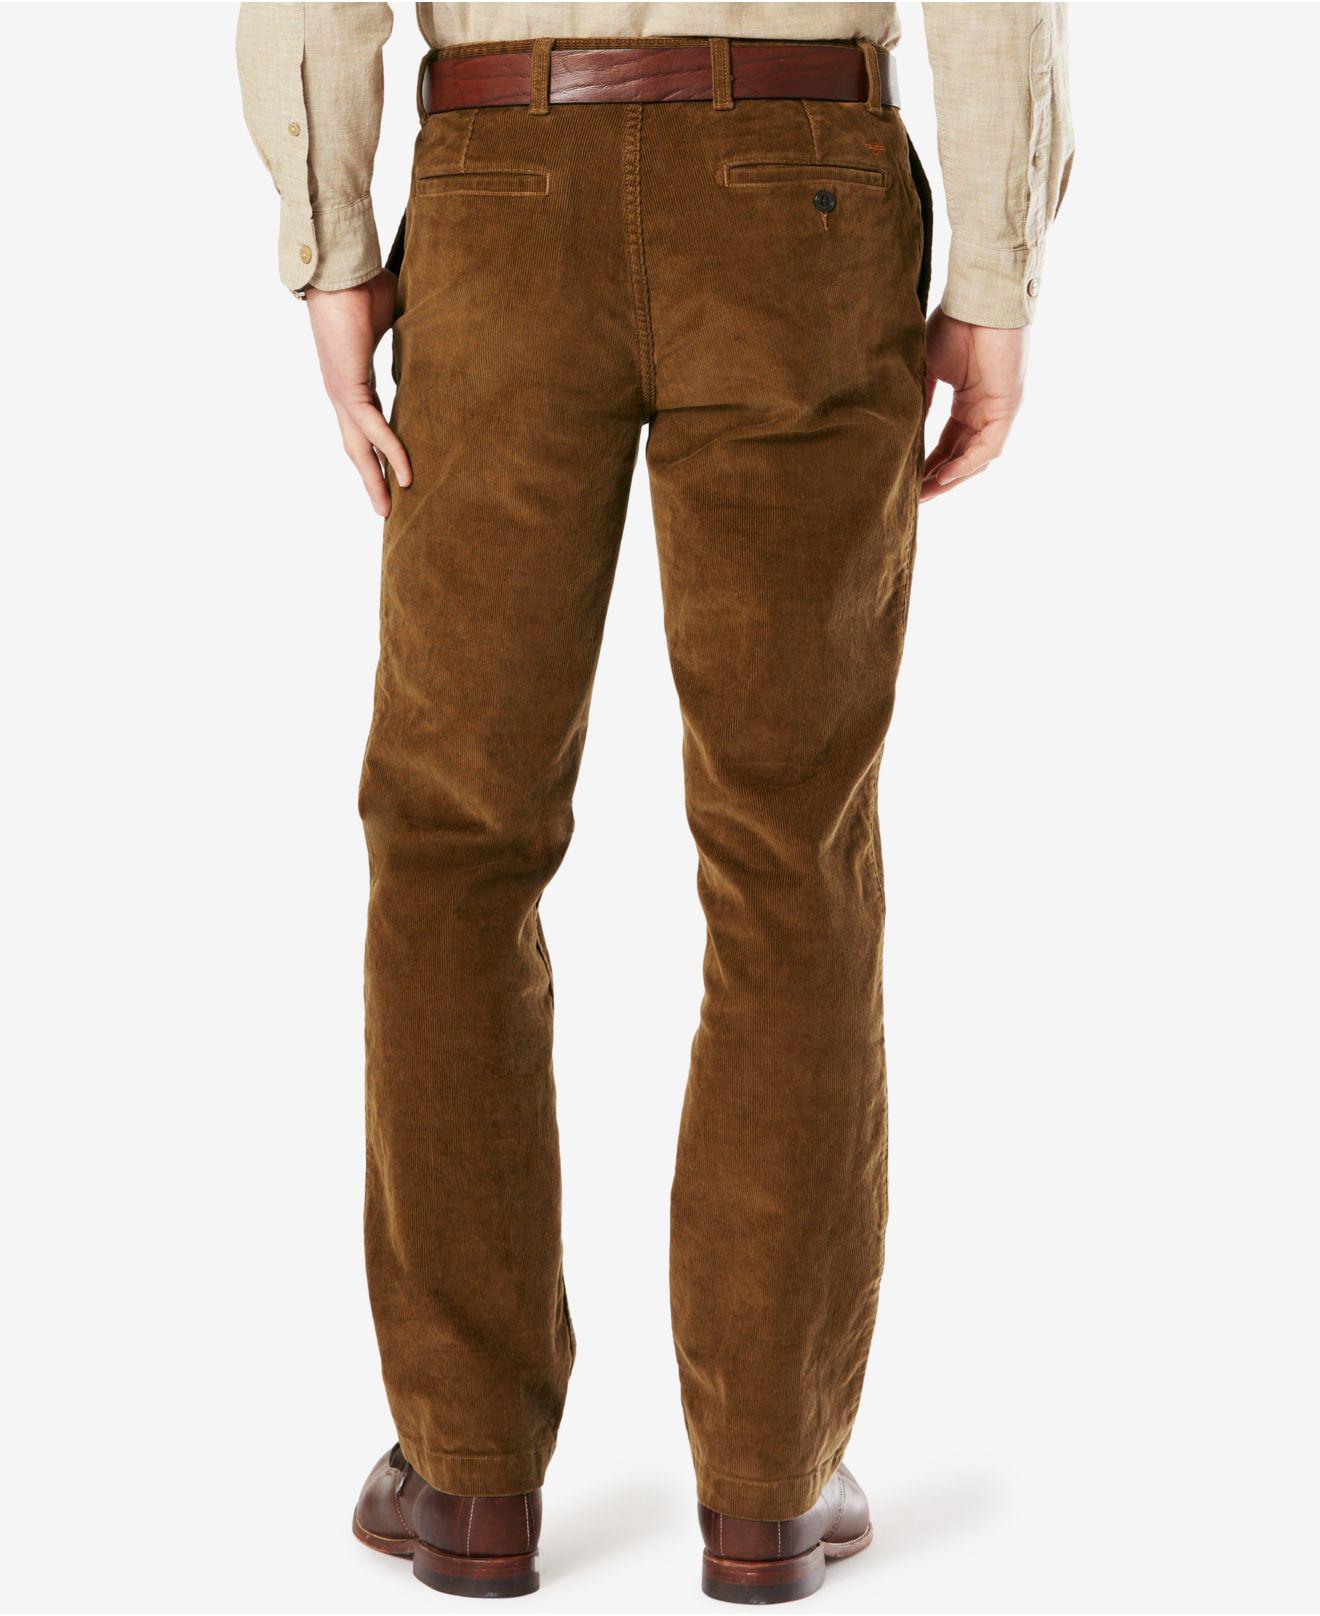 Dockers Men's Straight-fit Pacific Wash Corduroy Pants in Caramel ...